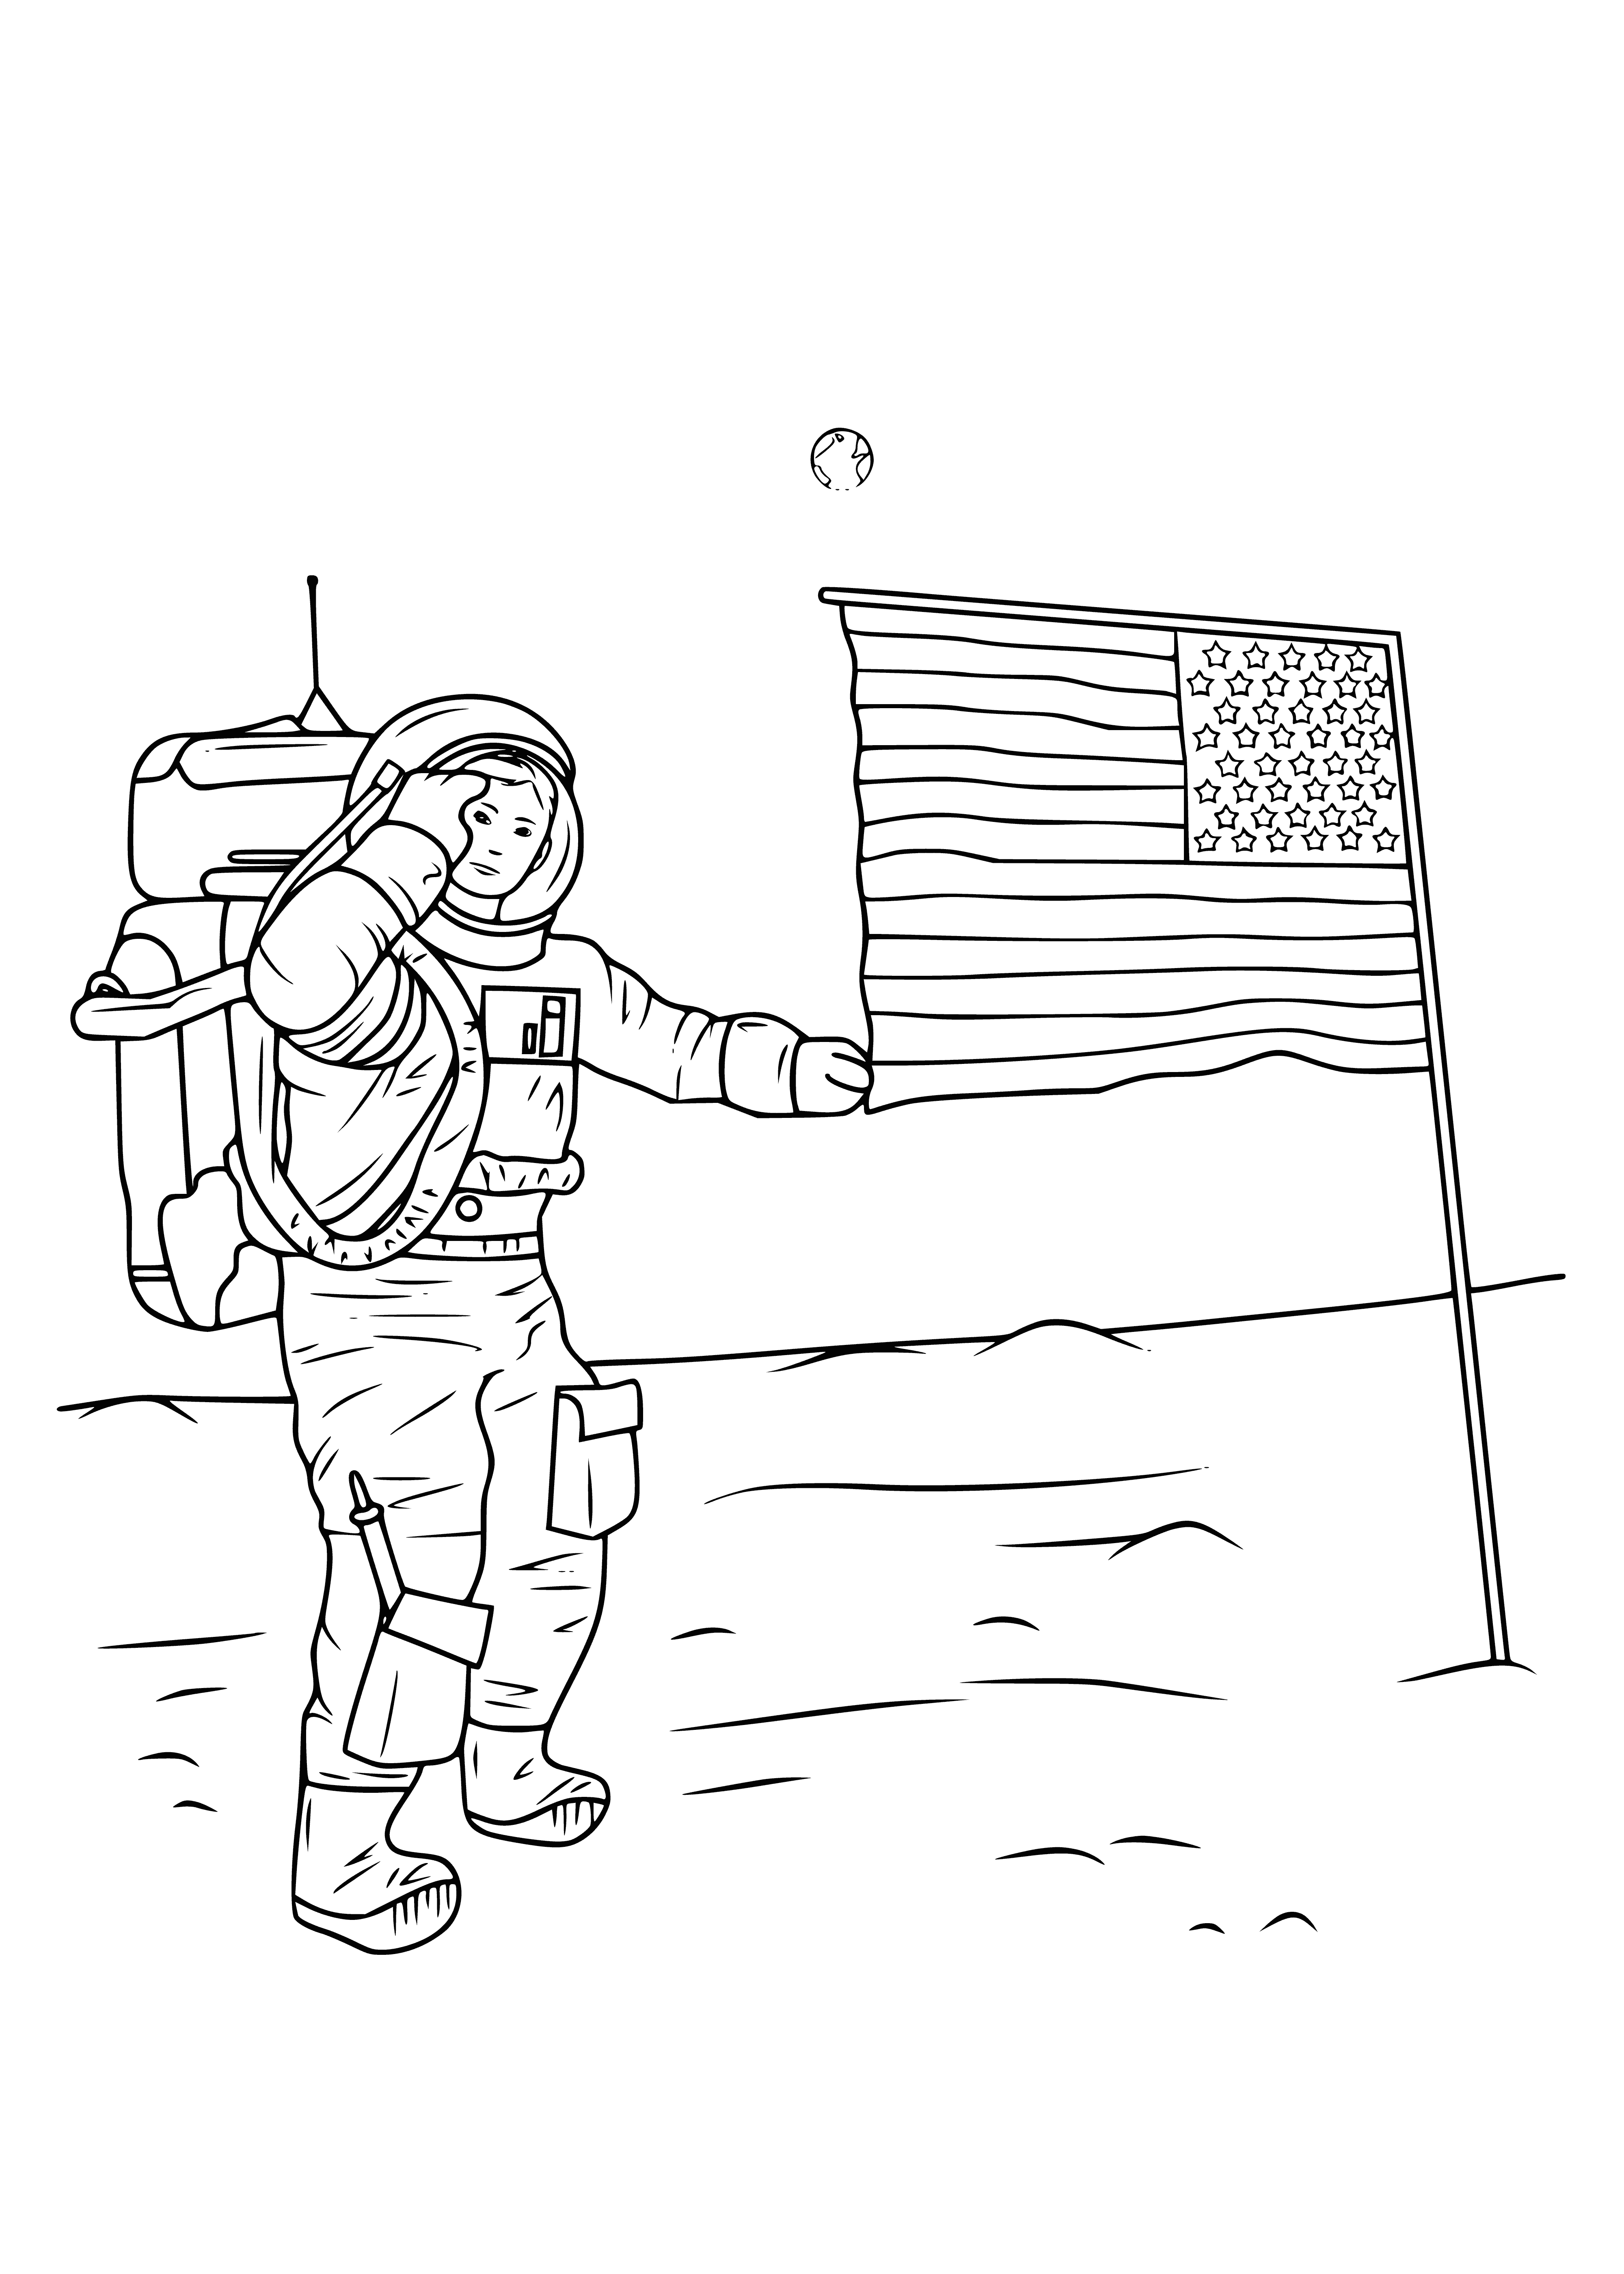 coloring page: Man stands on moon between Earth and the moon, wearing white suit with a round white hat. Arms at his sides, one foot in front of the other.